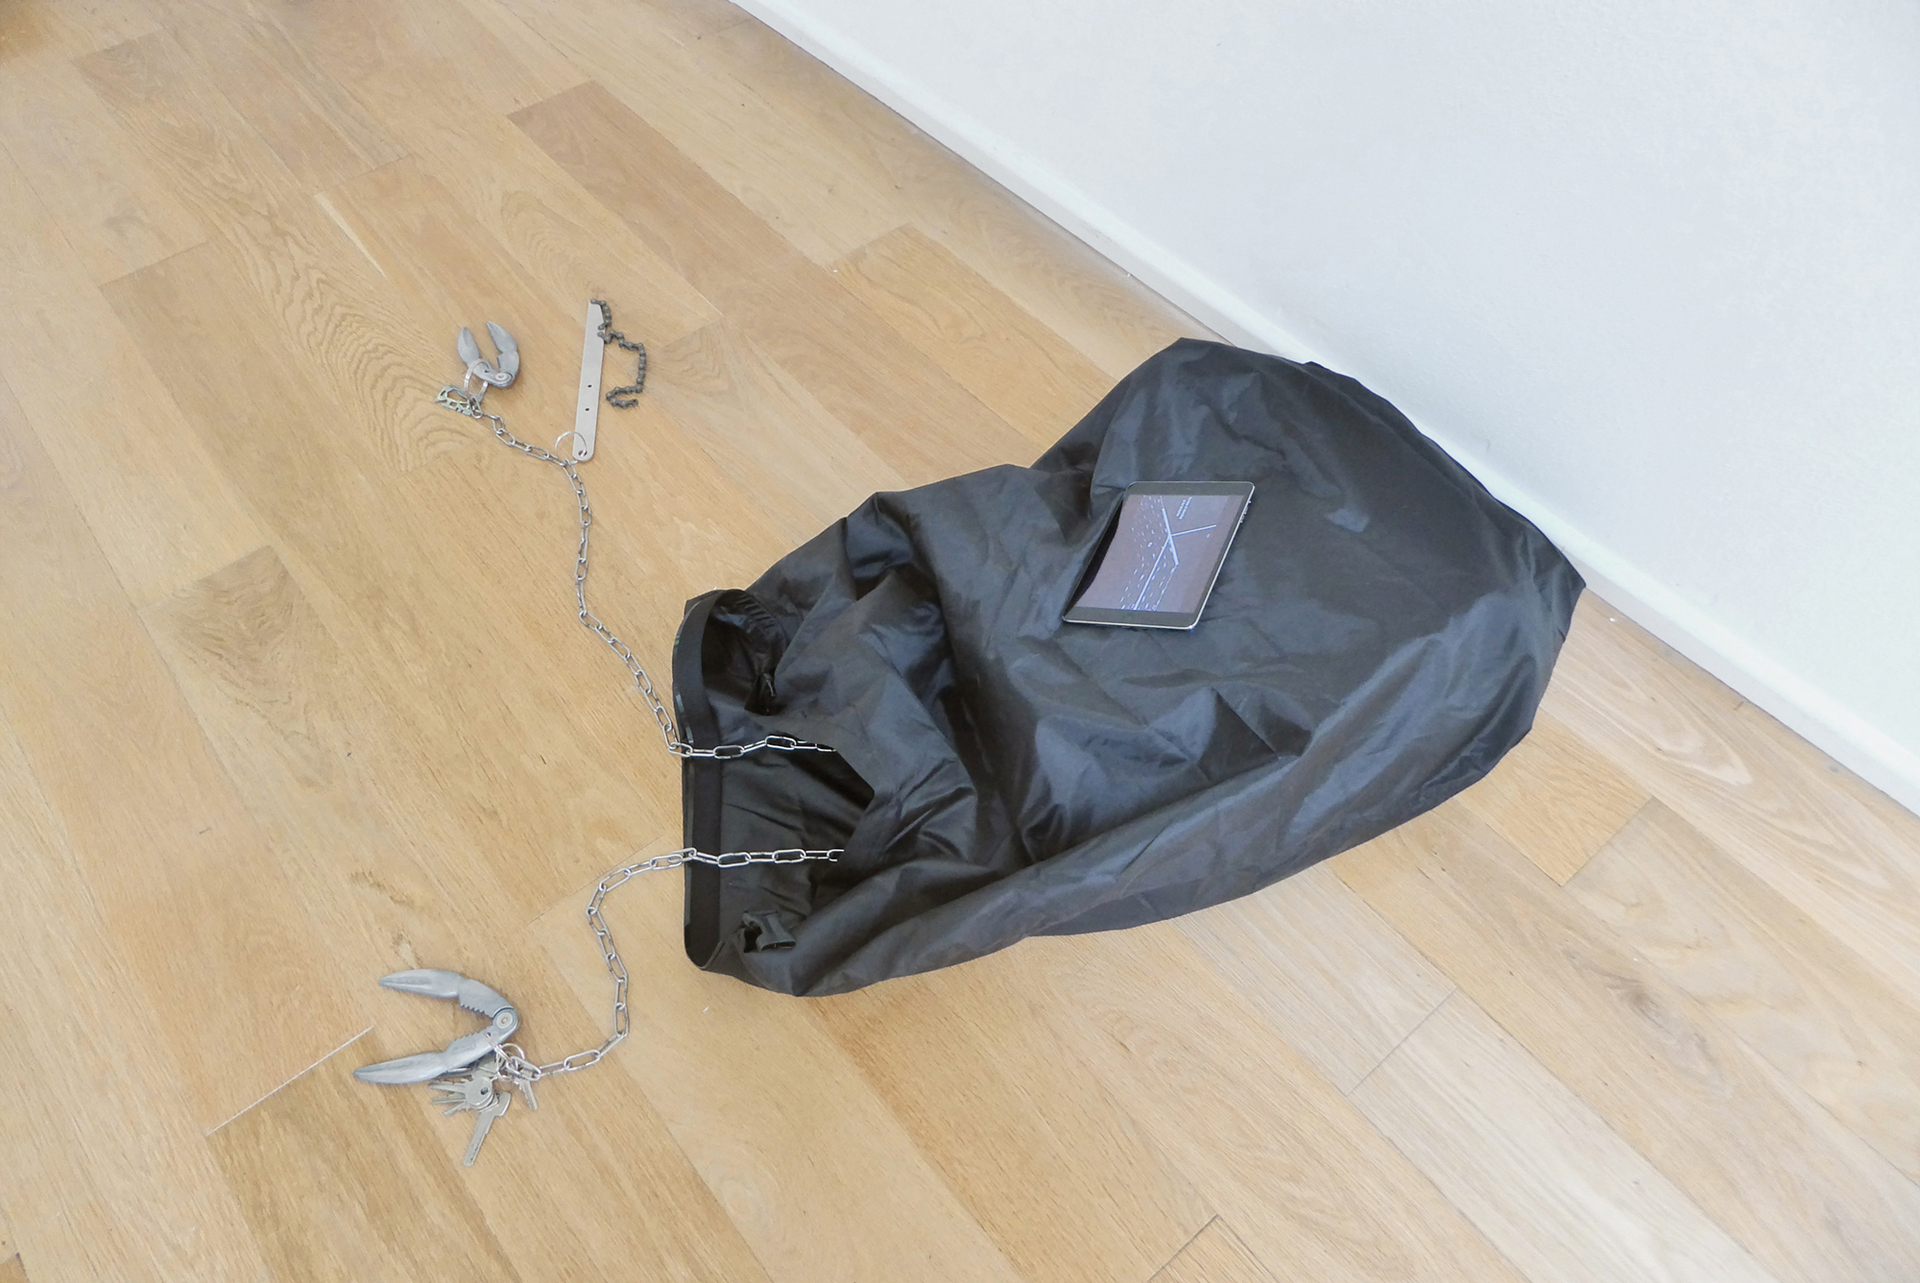 Lilian Robl,Winning Hearts and Minds, 2016, 5 min 55 sec (plus textile bag and assorted metal objects)